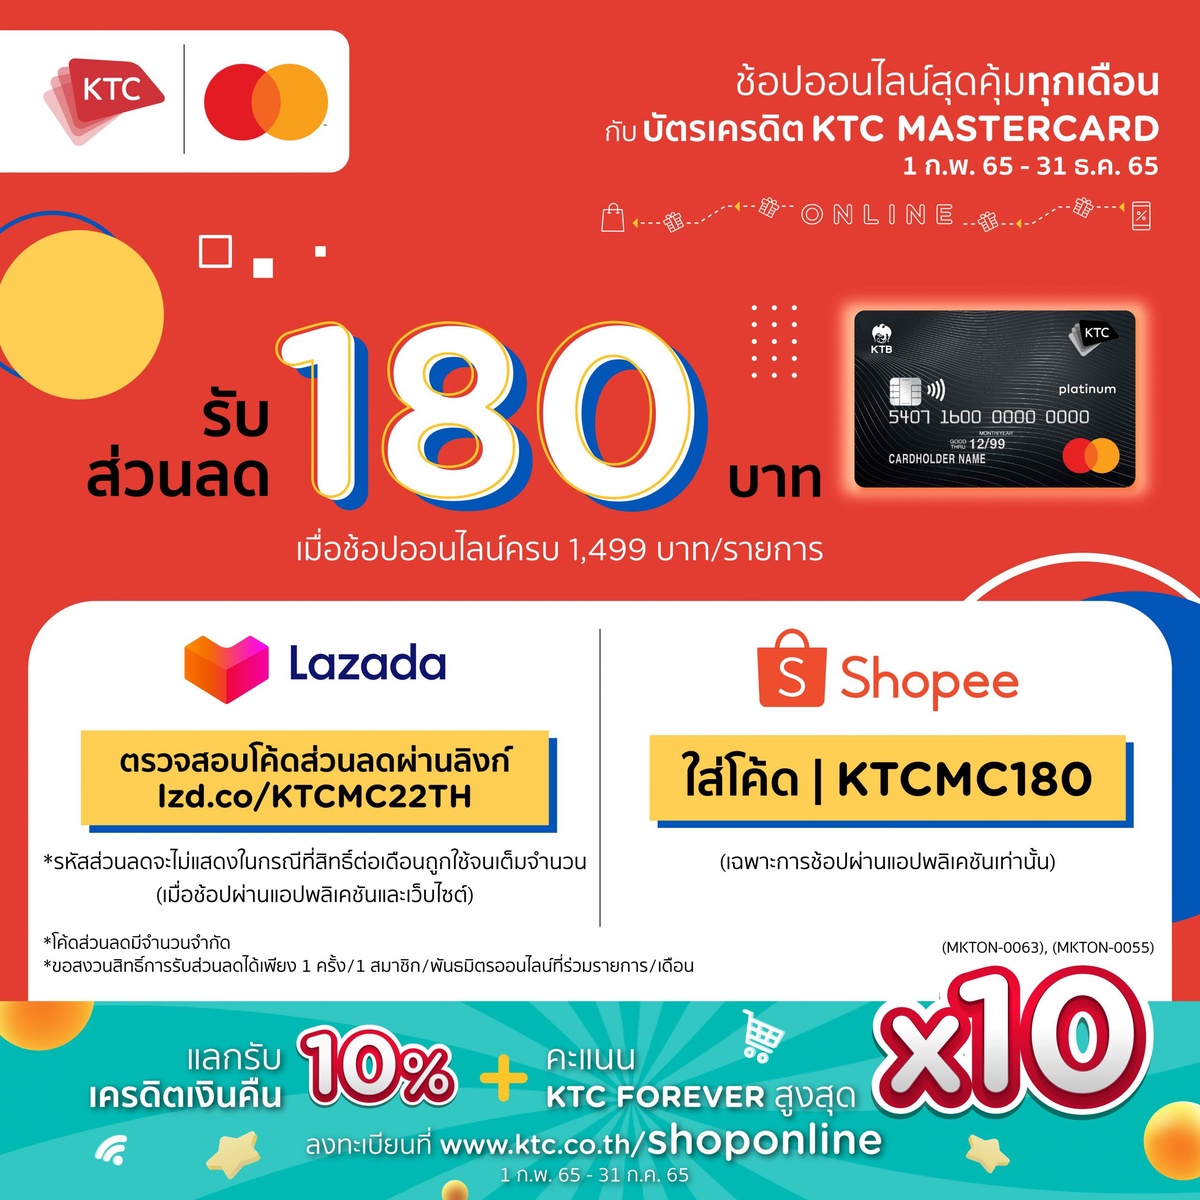 Online shoppers rejoice! KTC-Shopee-Lazada offer year-round discount codes for KTC-MASTERCARD credit card